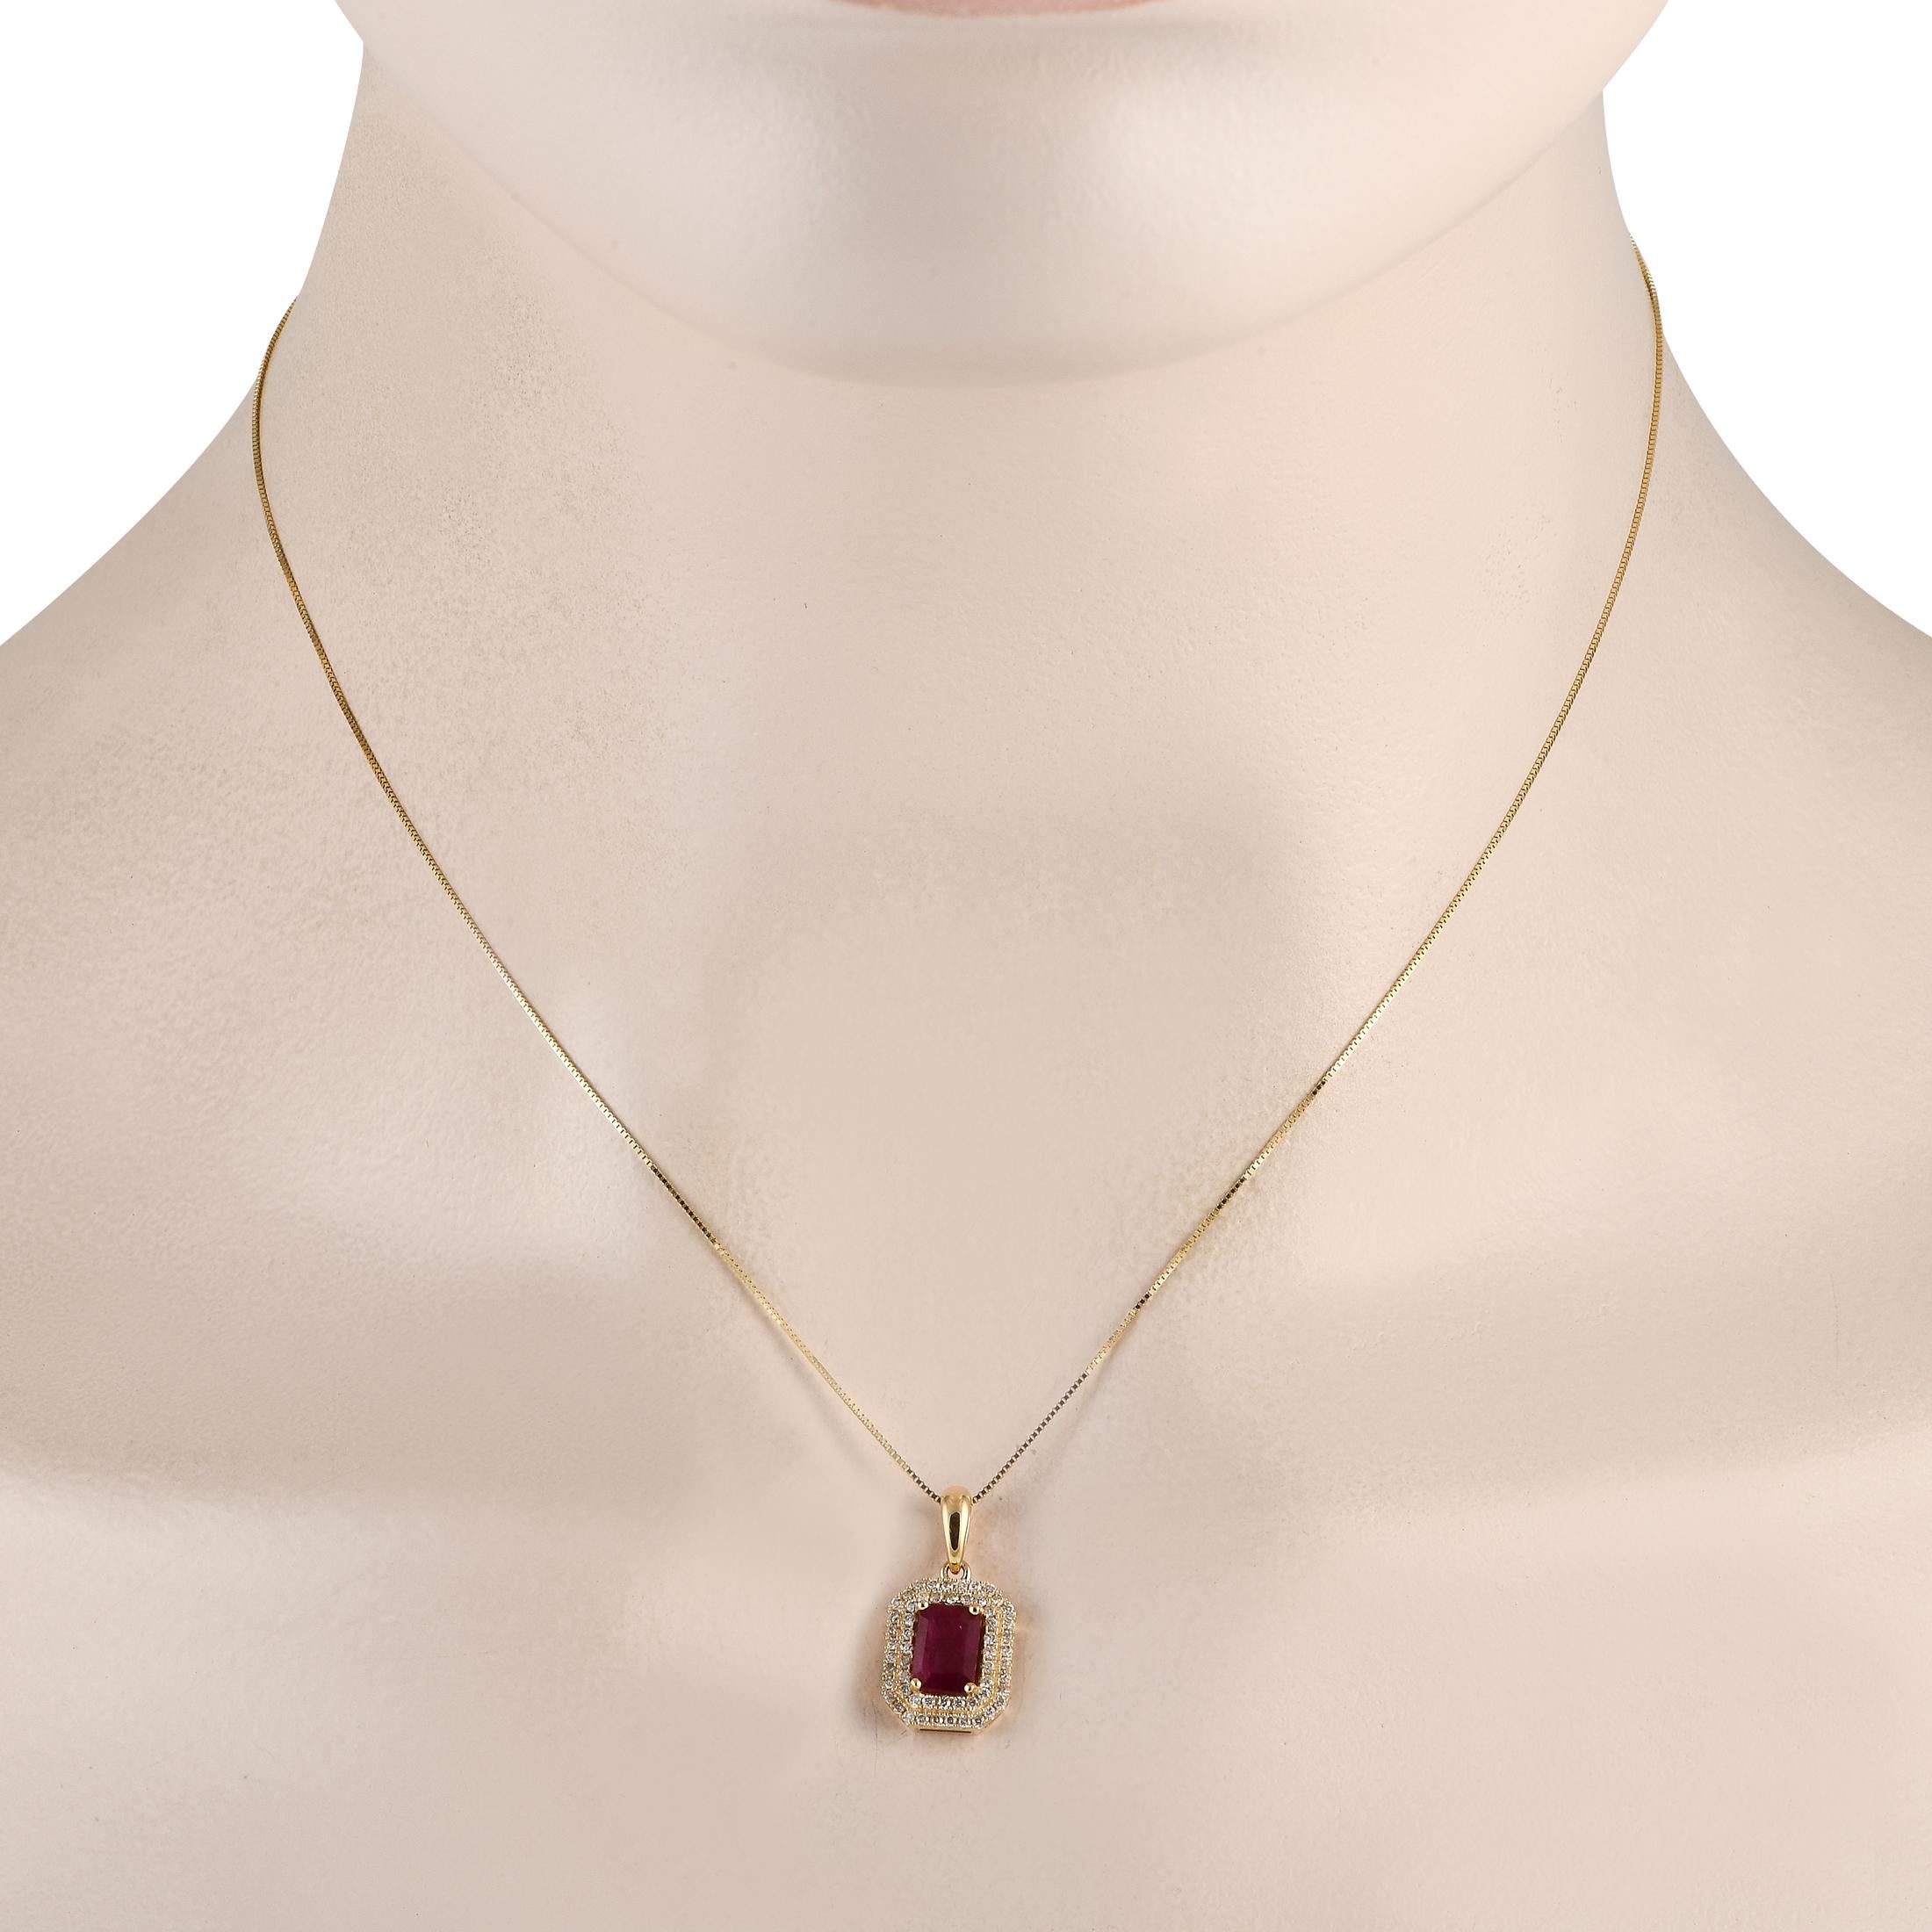 This timeless necklace will never go out of style. Suspended from a sleek 16 box chain, a 14K Yellow Gold pendant measuring 0.75 long by 0.45 wide makes a statement thanks to a stunning Ruby center stone and Diamond accents totaling 0.24 carats.This